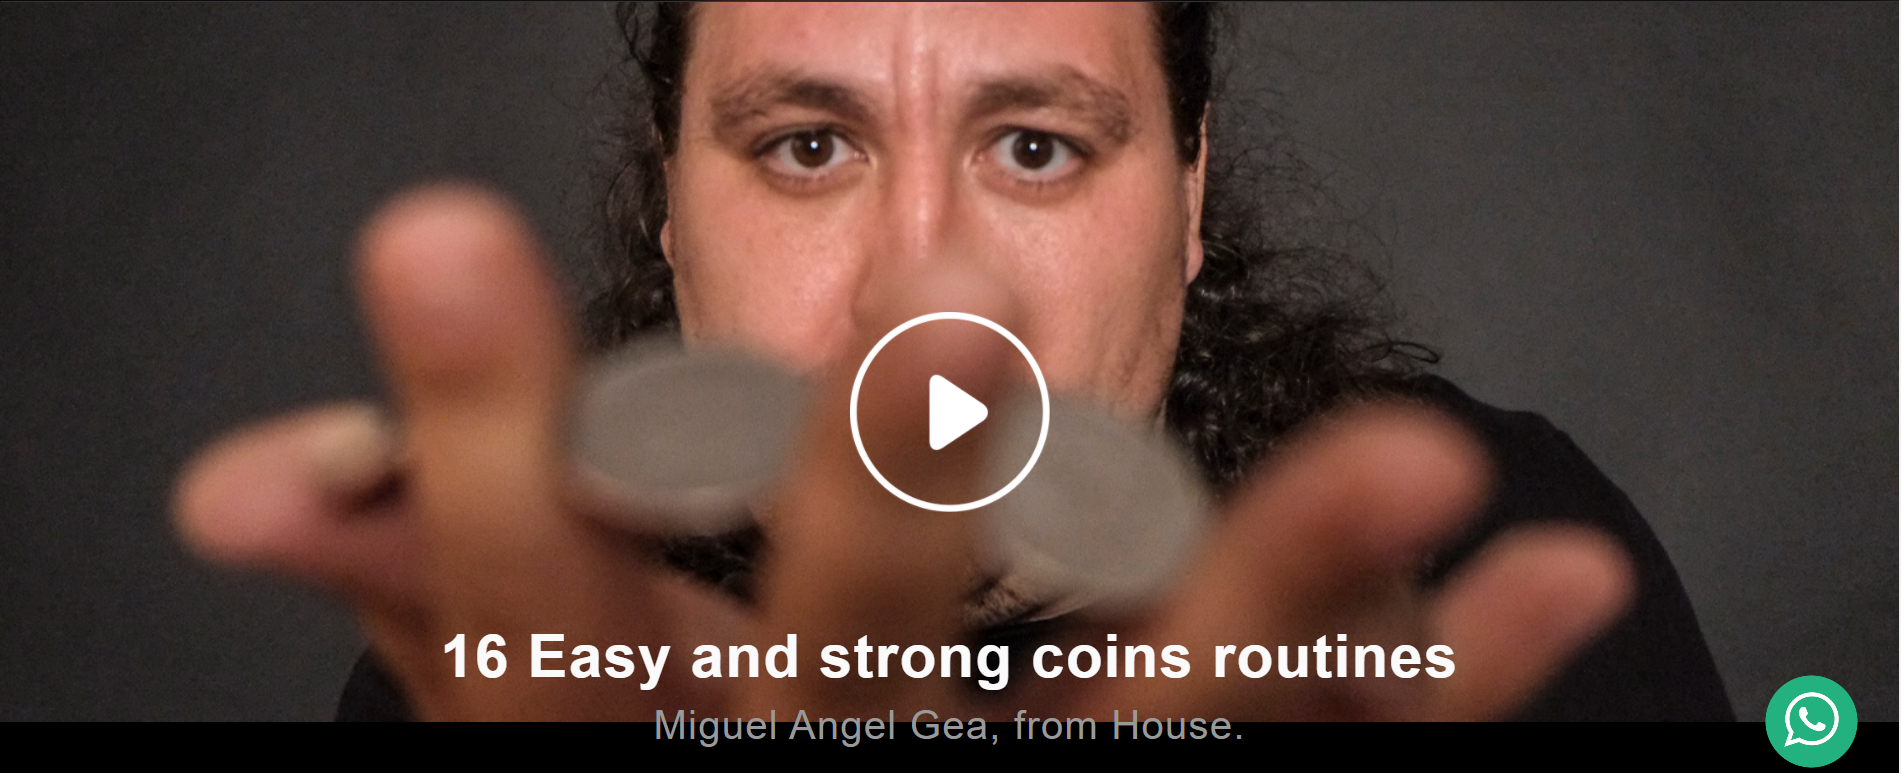 Miguel Angel Gea from House - 16 Easy and Strong Coins Routines